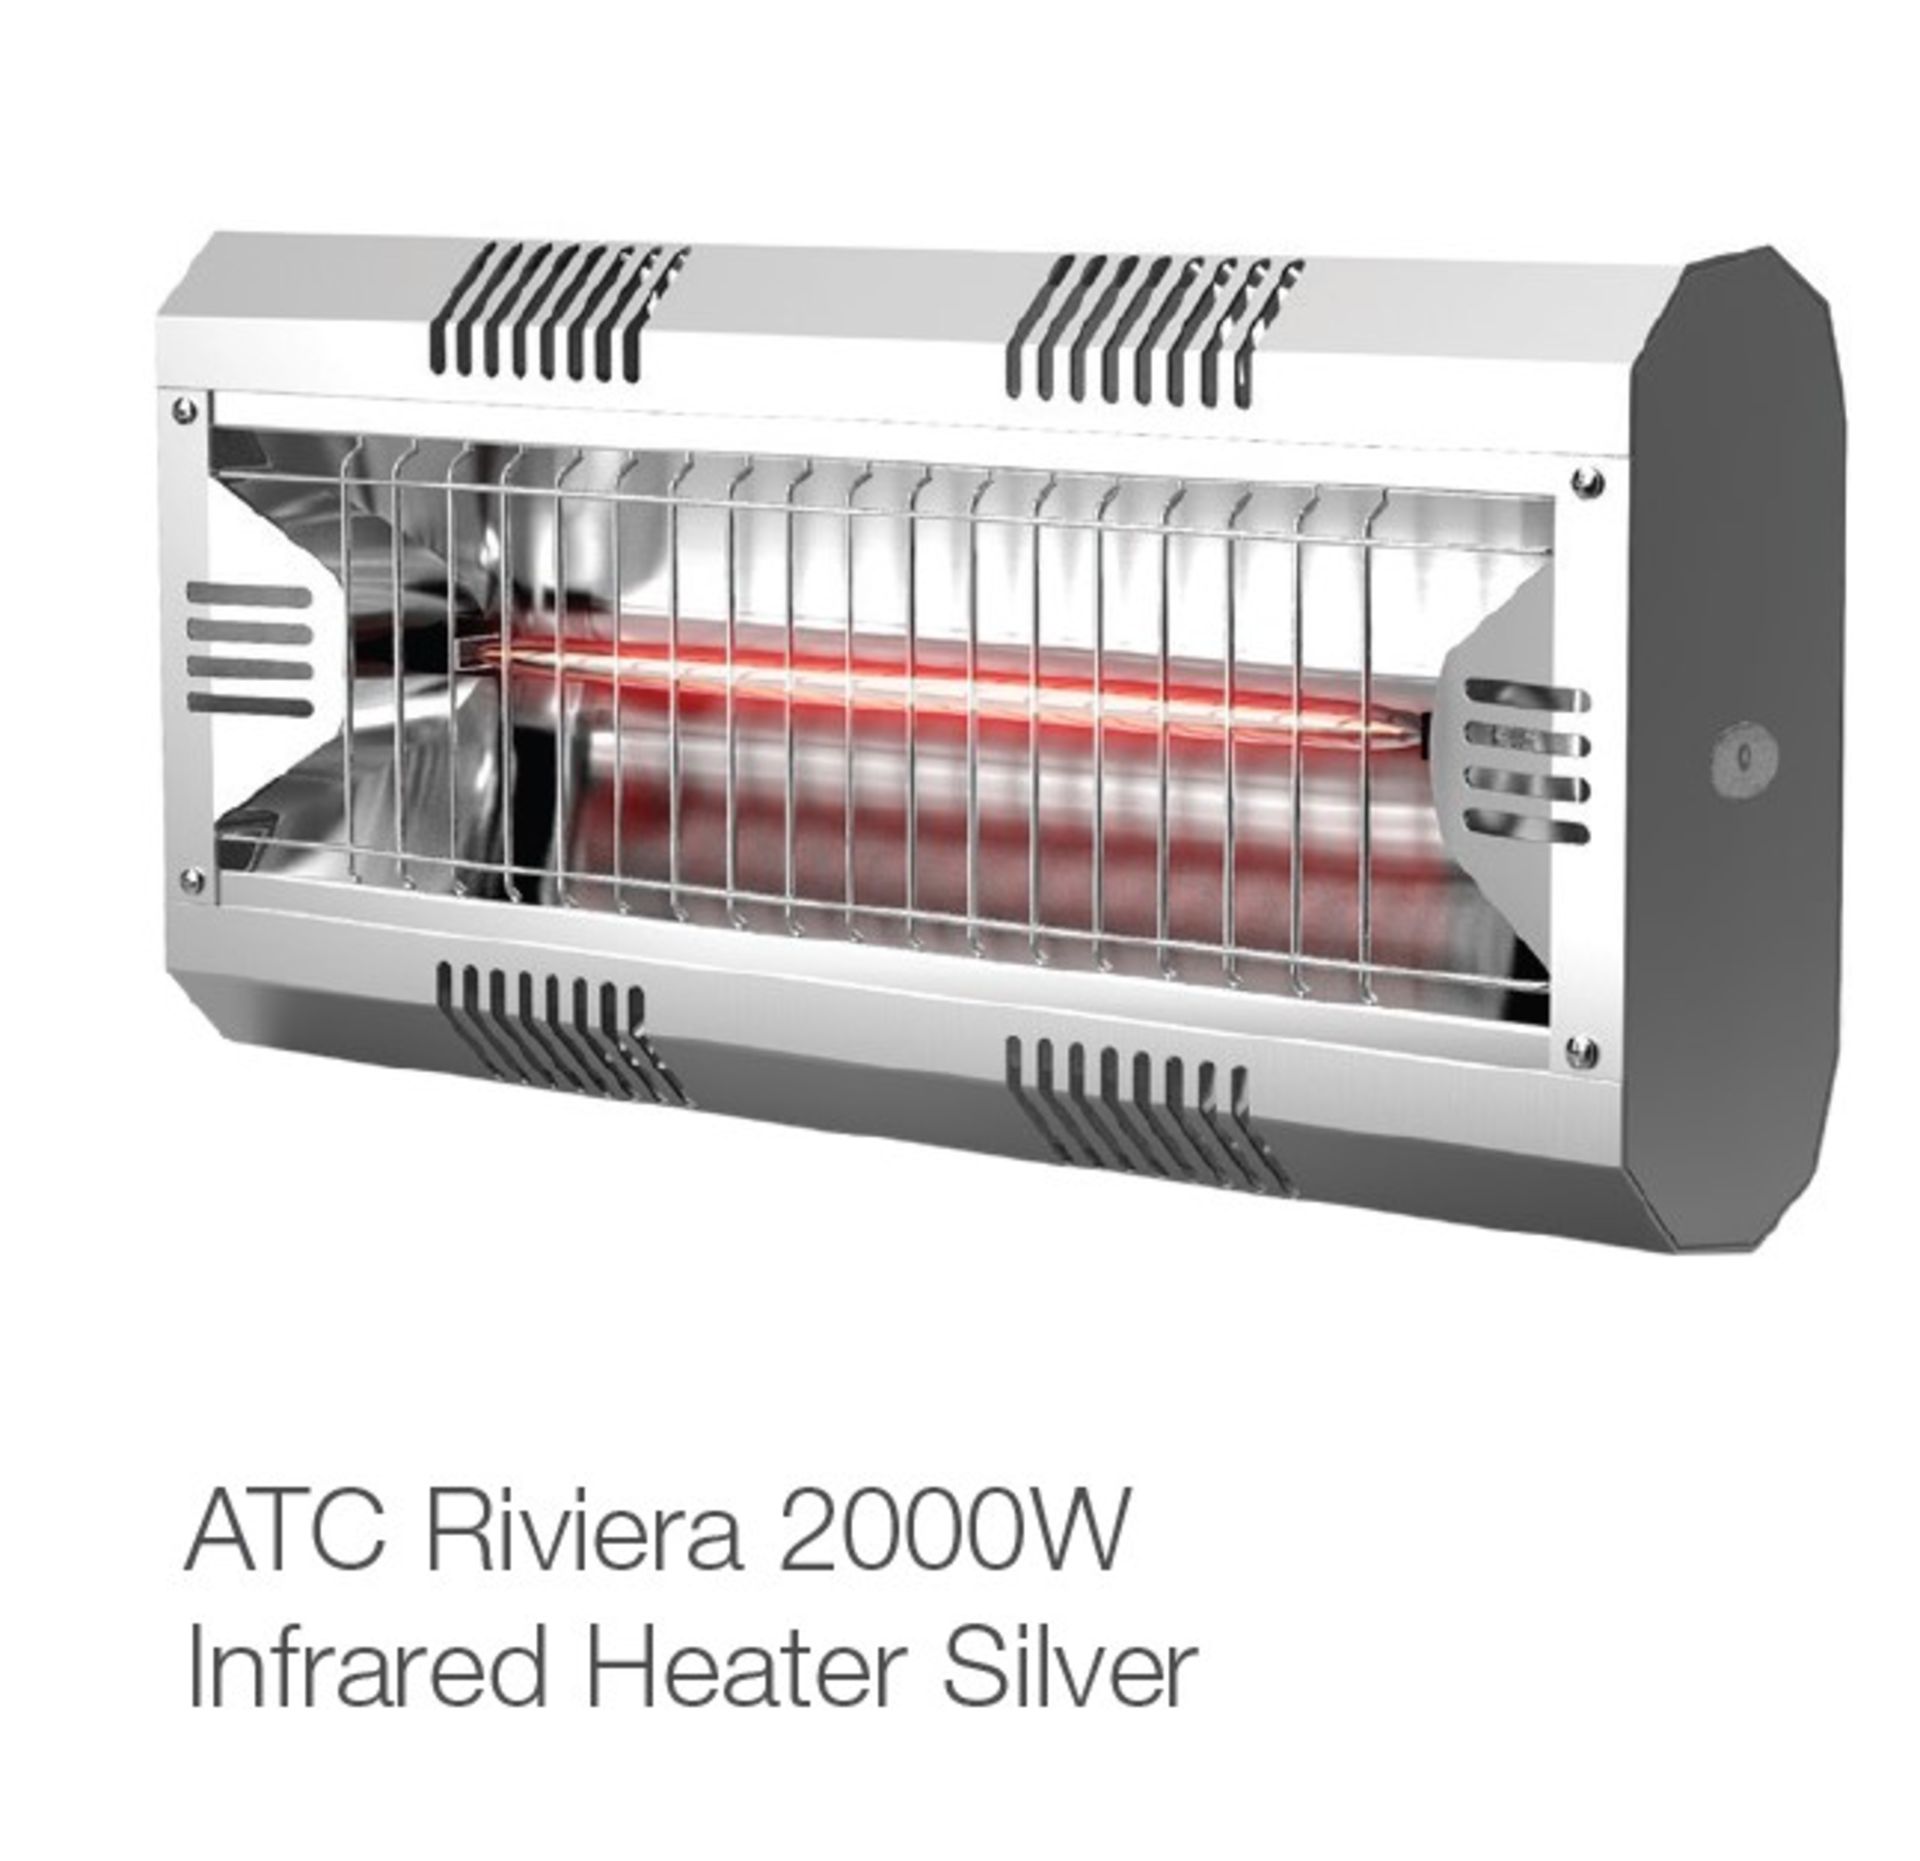 1 x ATC Riviera 2000W Outdoor Quartz Infrared Electric Heater with Silver Surround - Boxed,